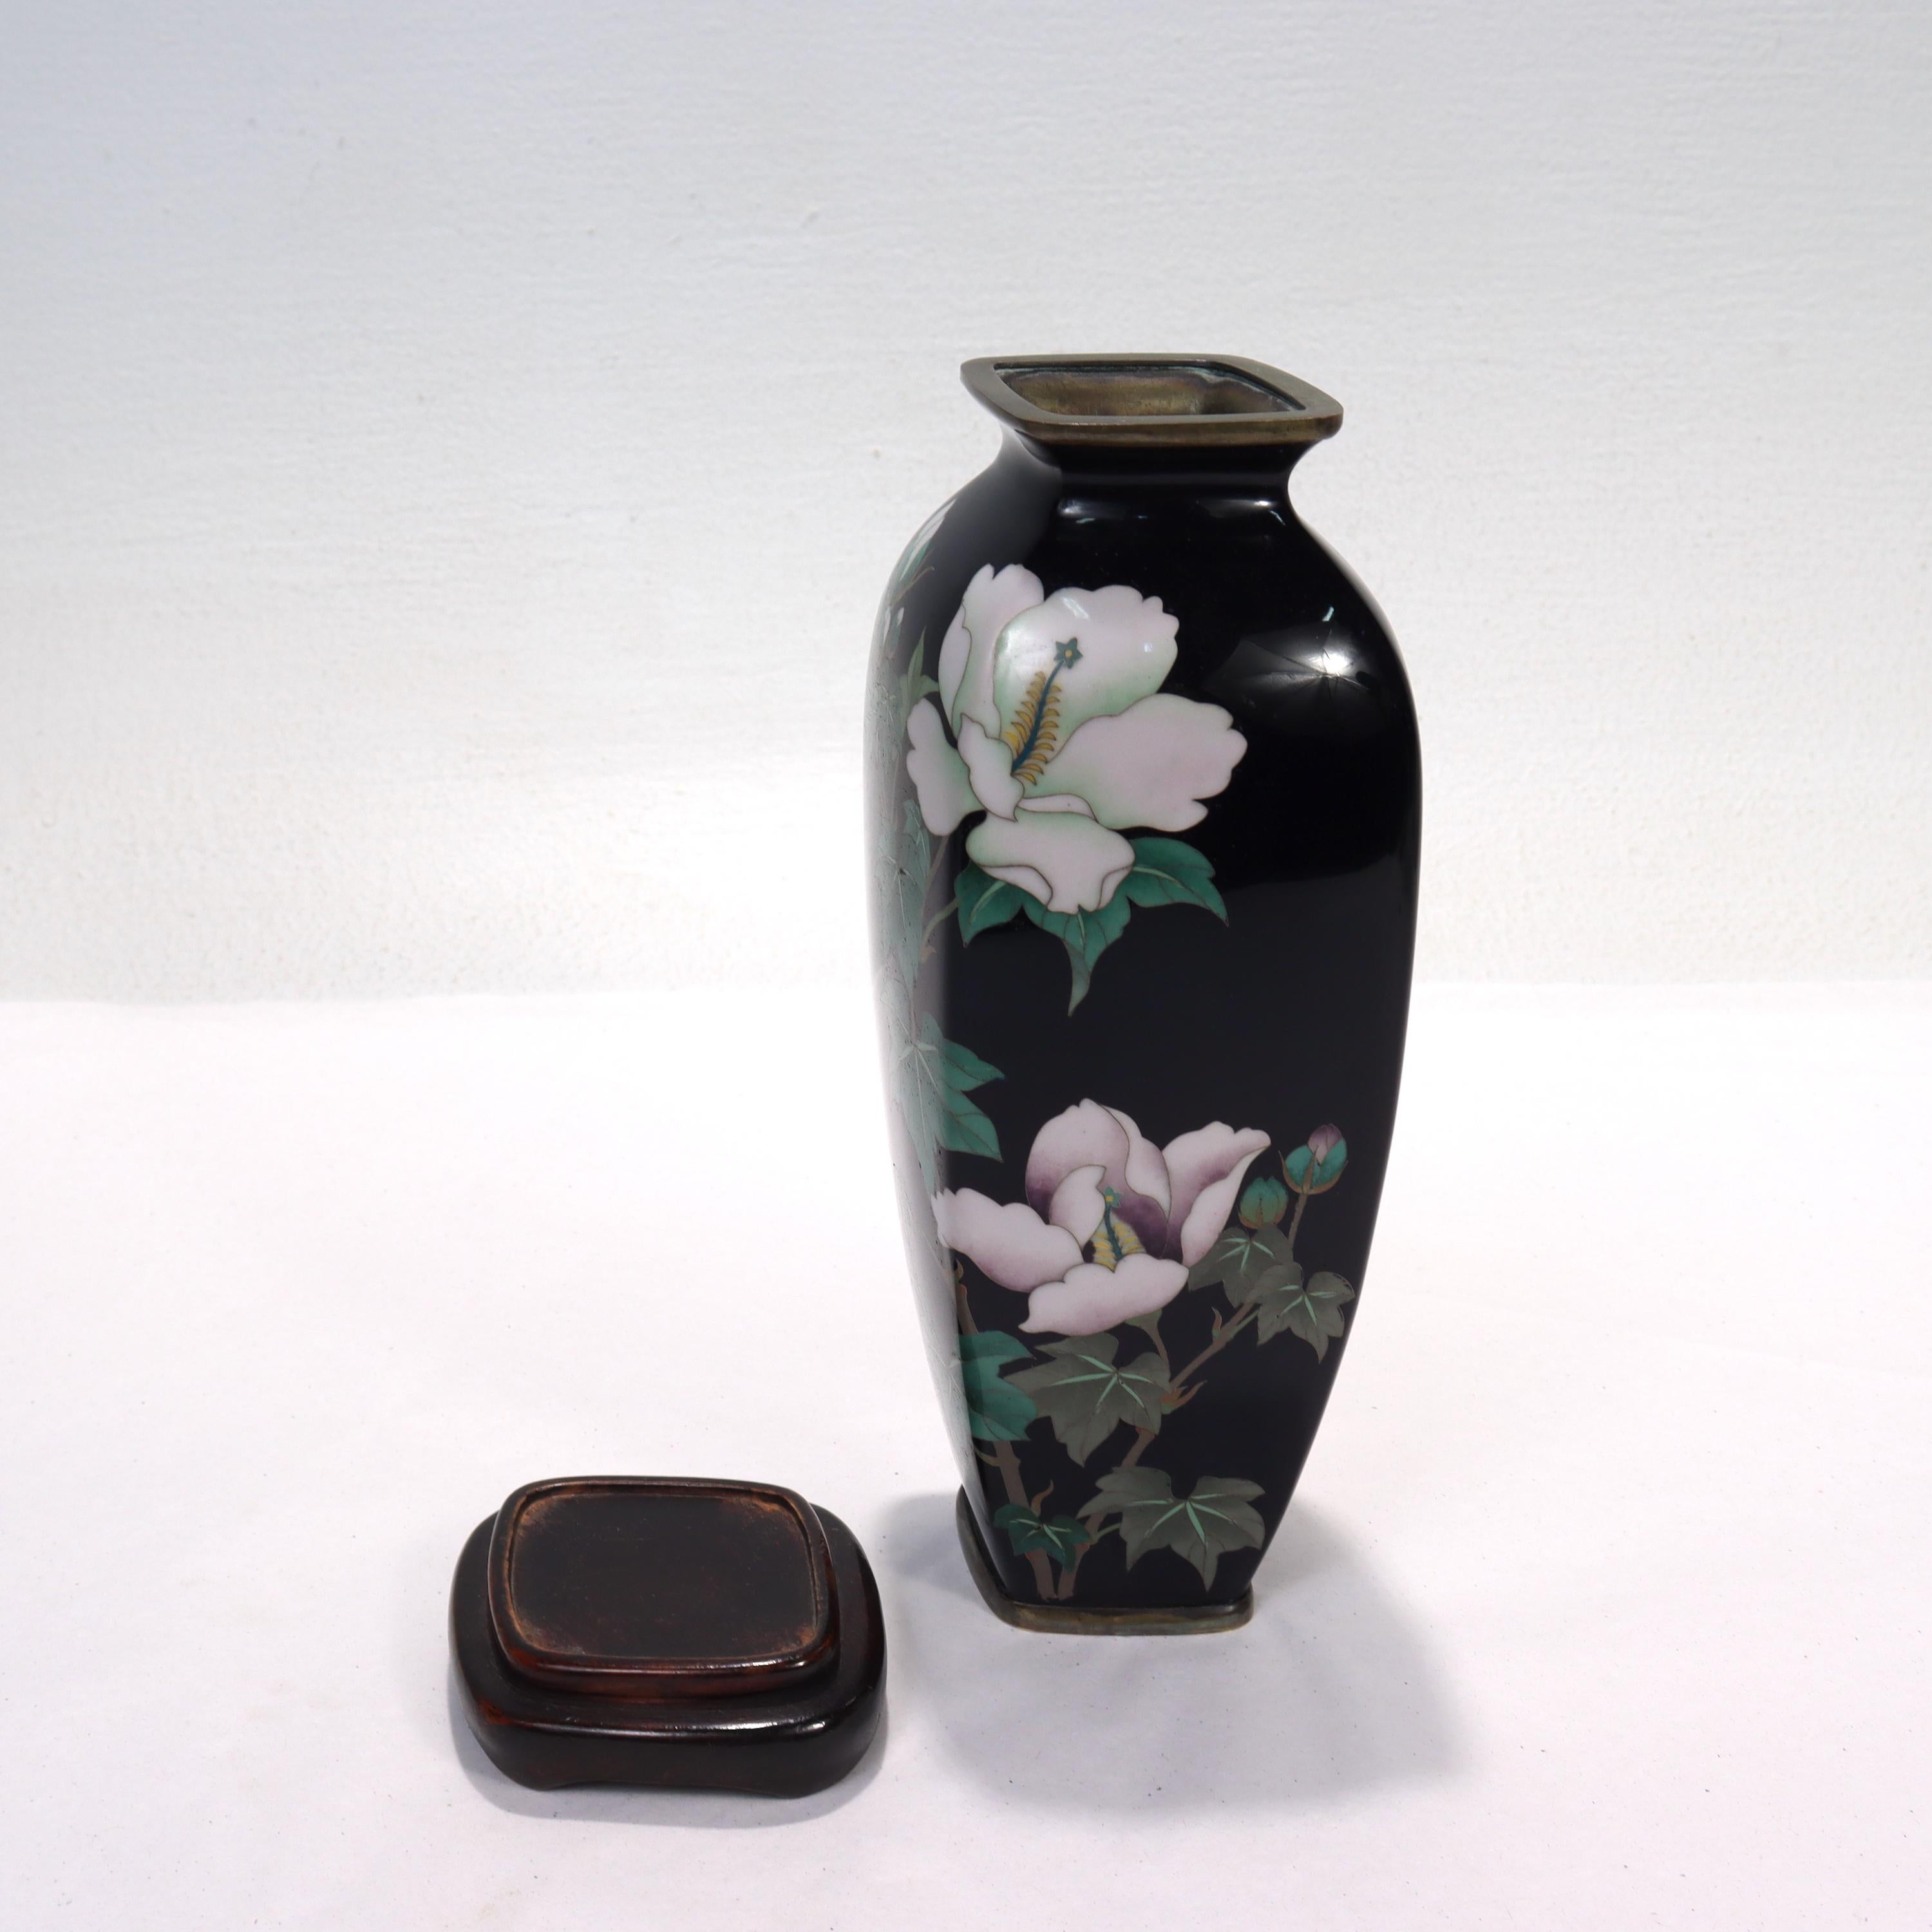 Old or Antique Japanese Wired Cloisonne Enamel Vase with White Flowers 3